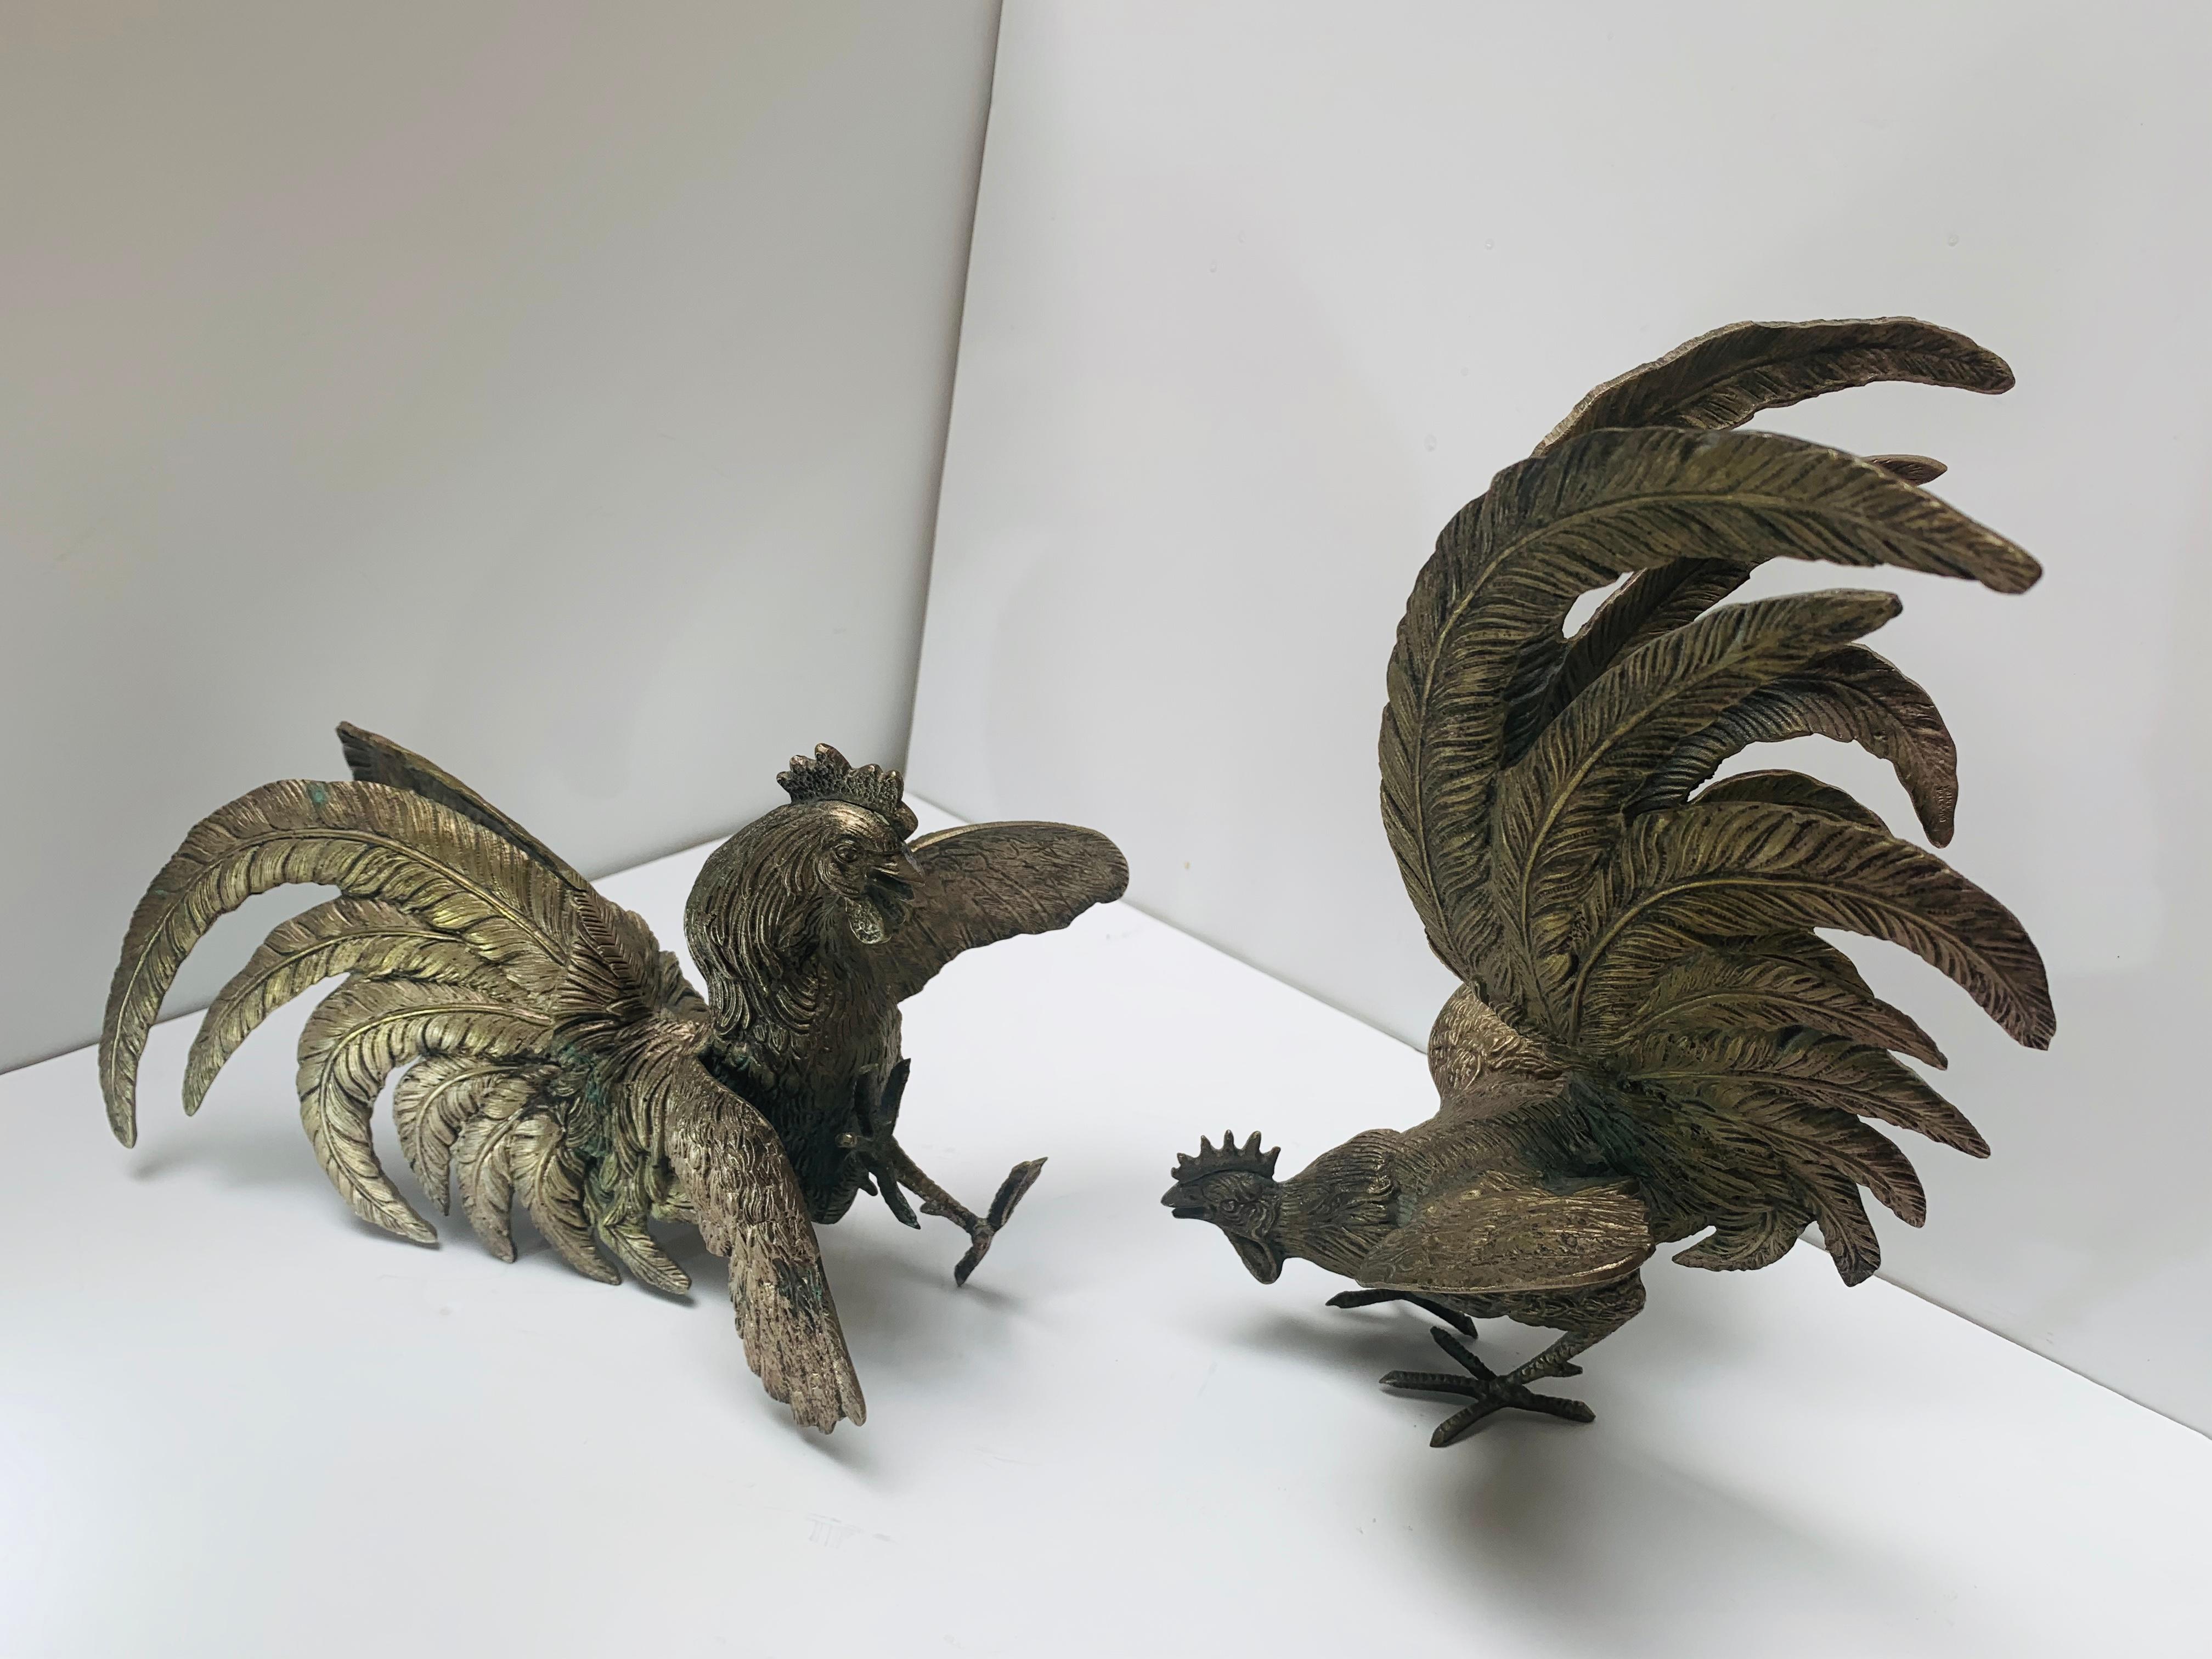 Antique set of fighting rooster sculptural art pieces / bookends.